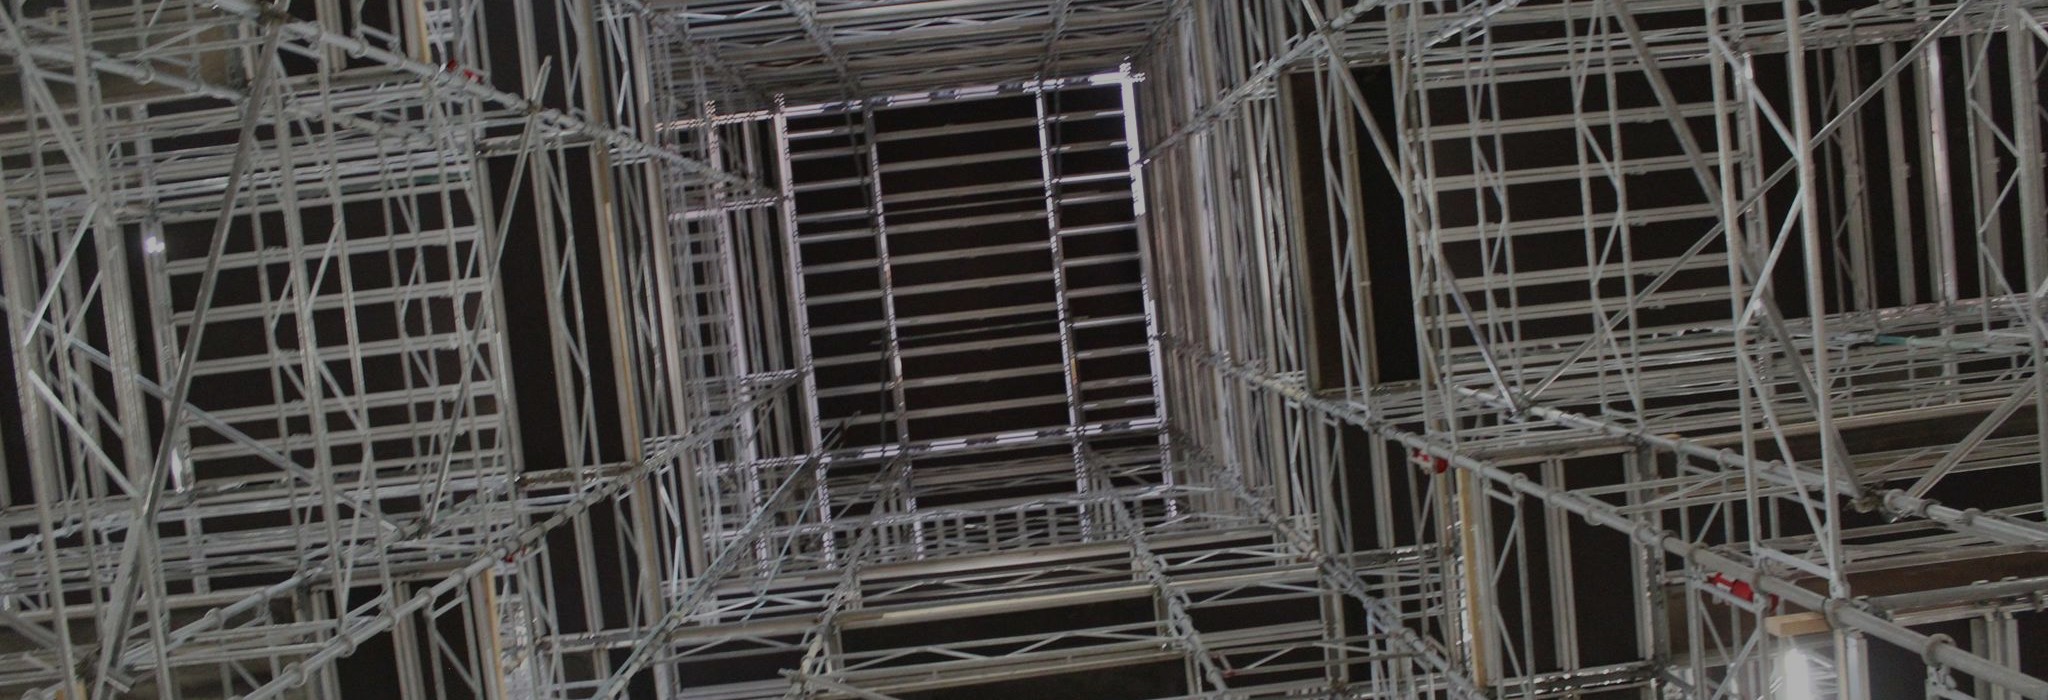 bird's eye view of shoring tower systems